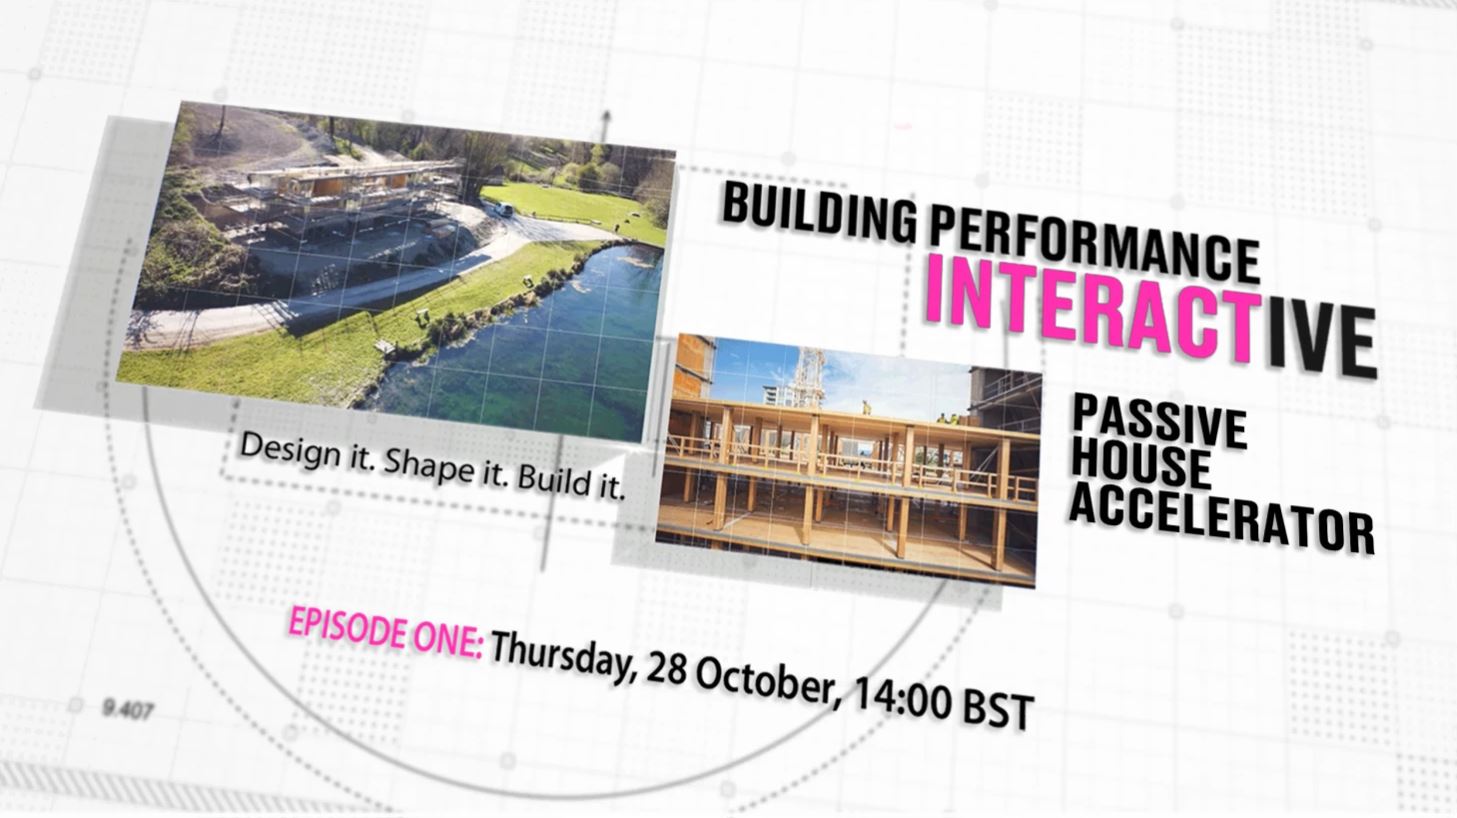 Announcing The "Building Performance Interactive" Miniseries